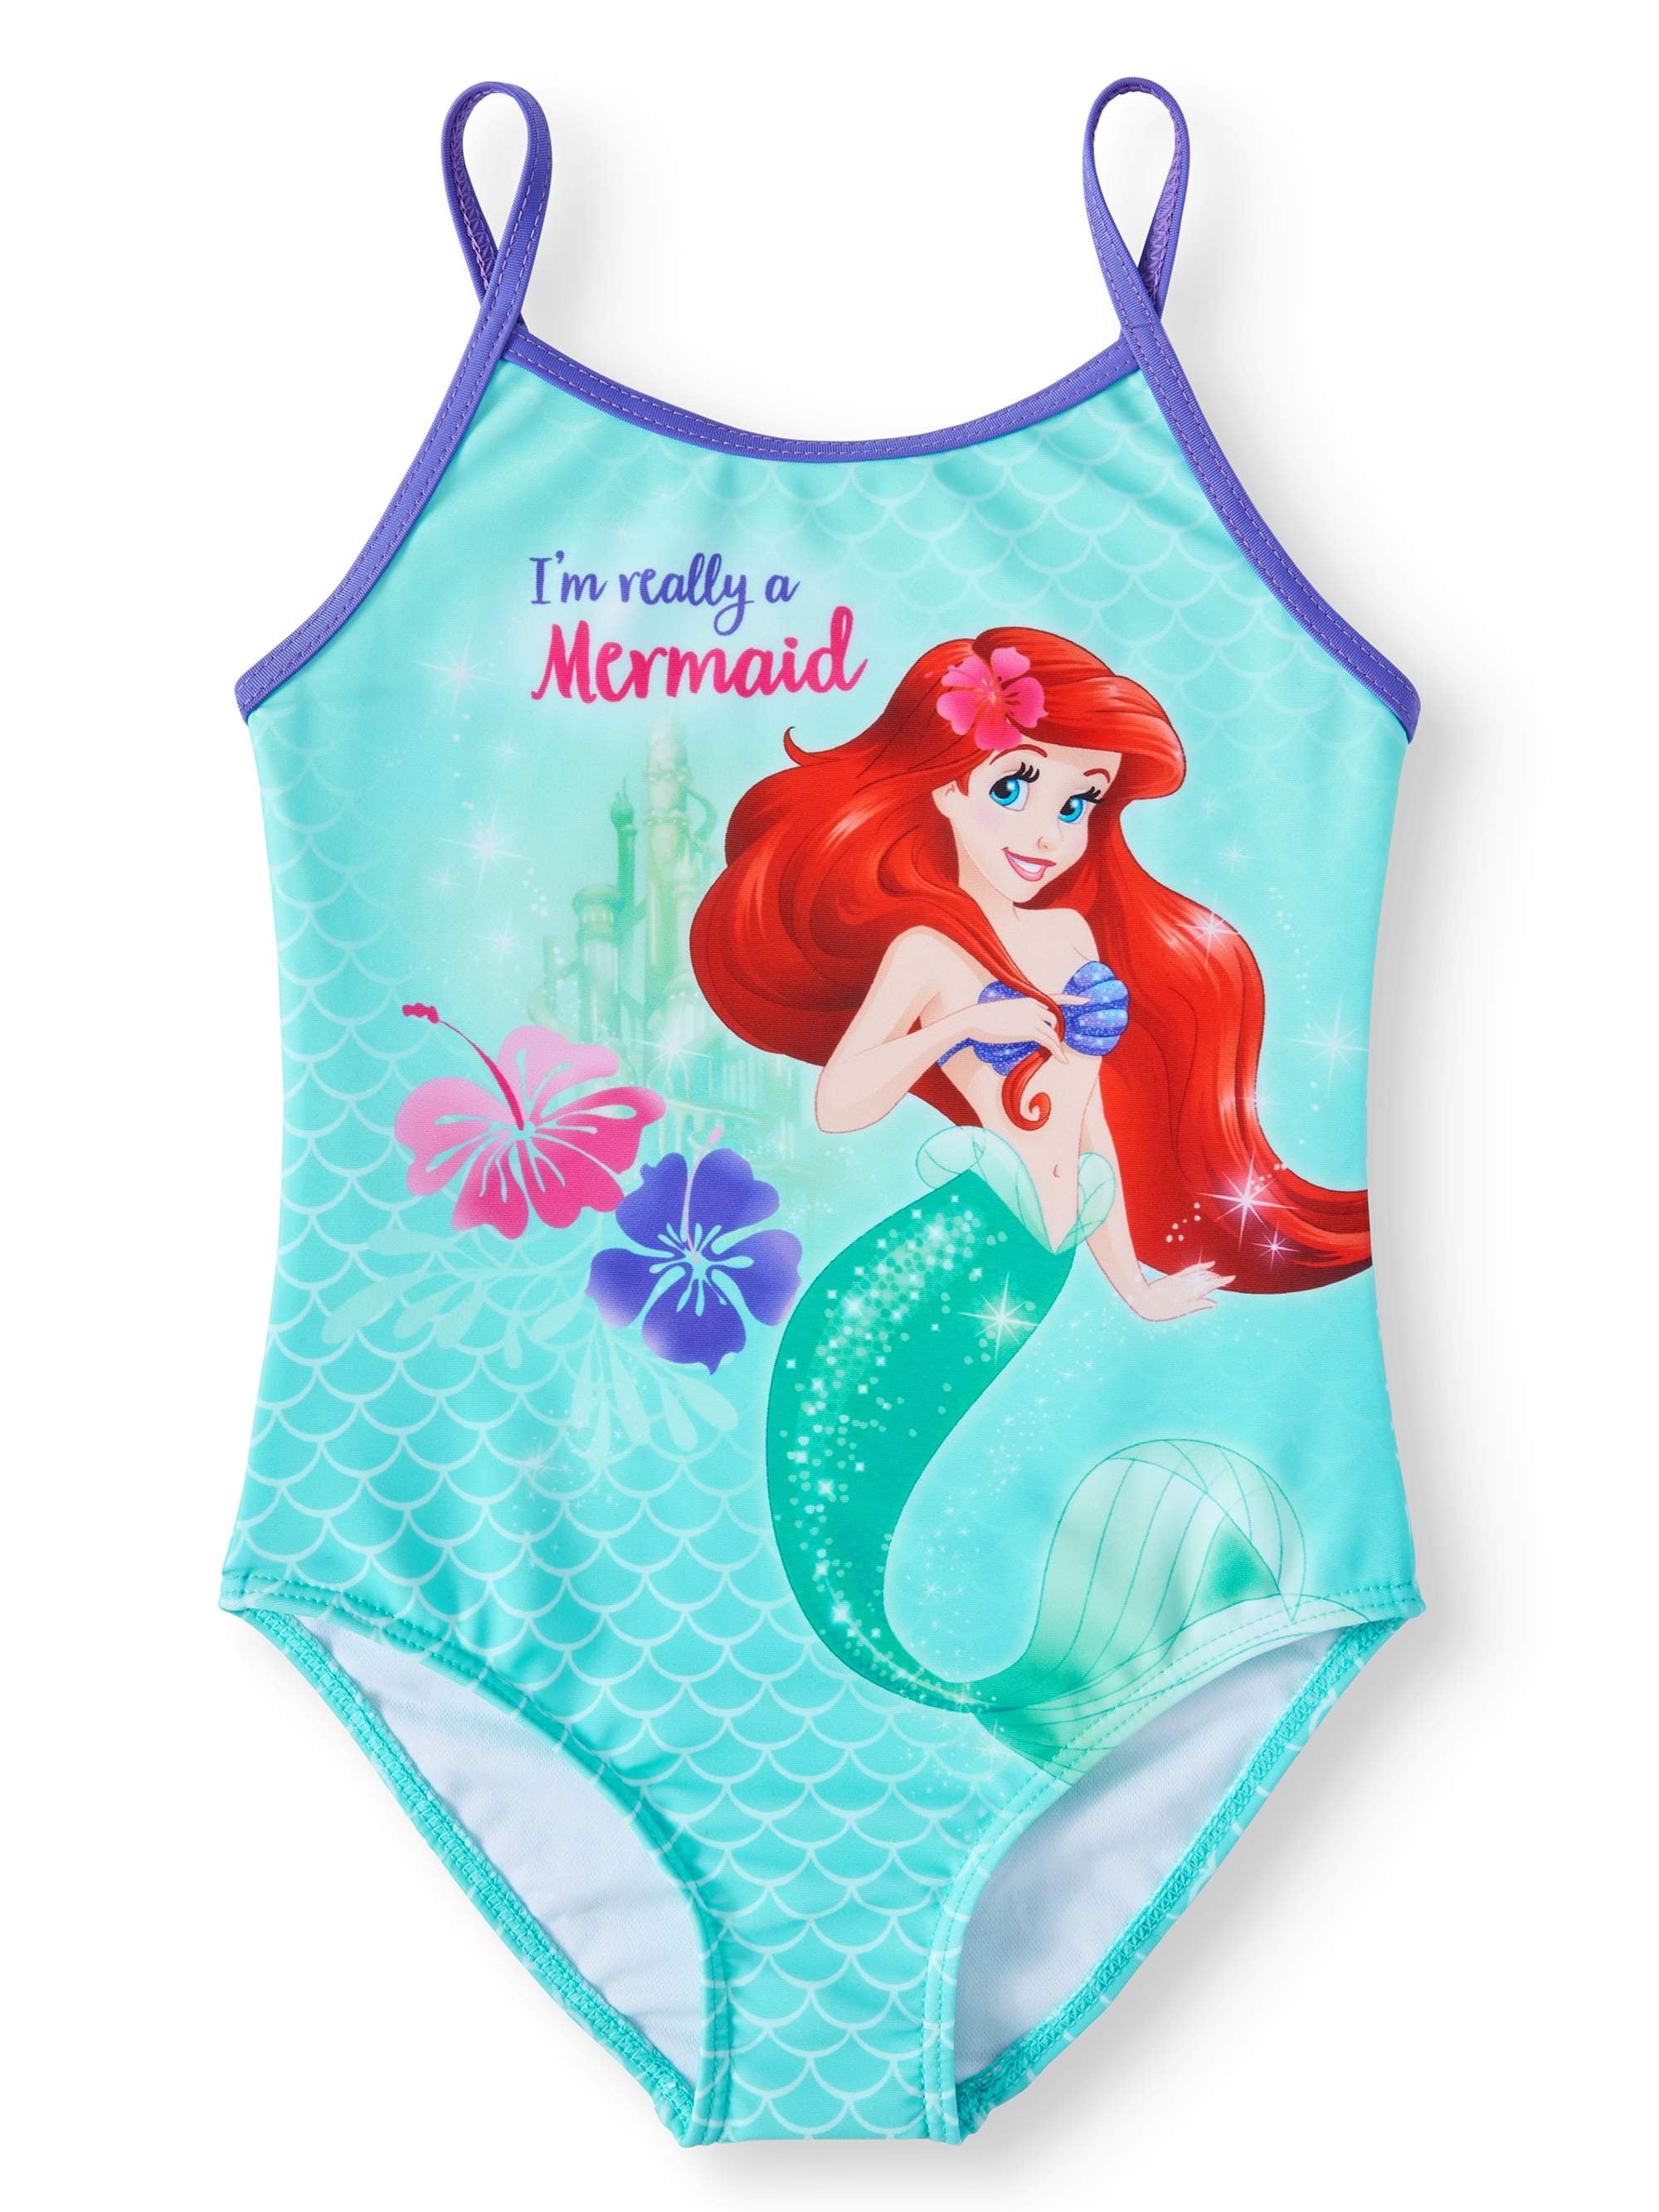 Details about   Girls Swimming suit Princess Little Mermaid Swimsuit Swimwear 4-5T H2 MG 